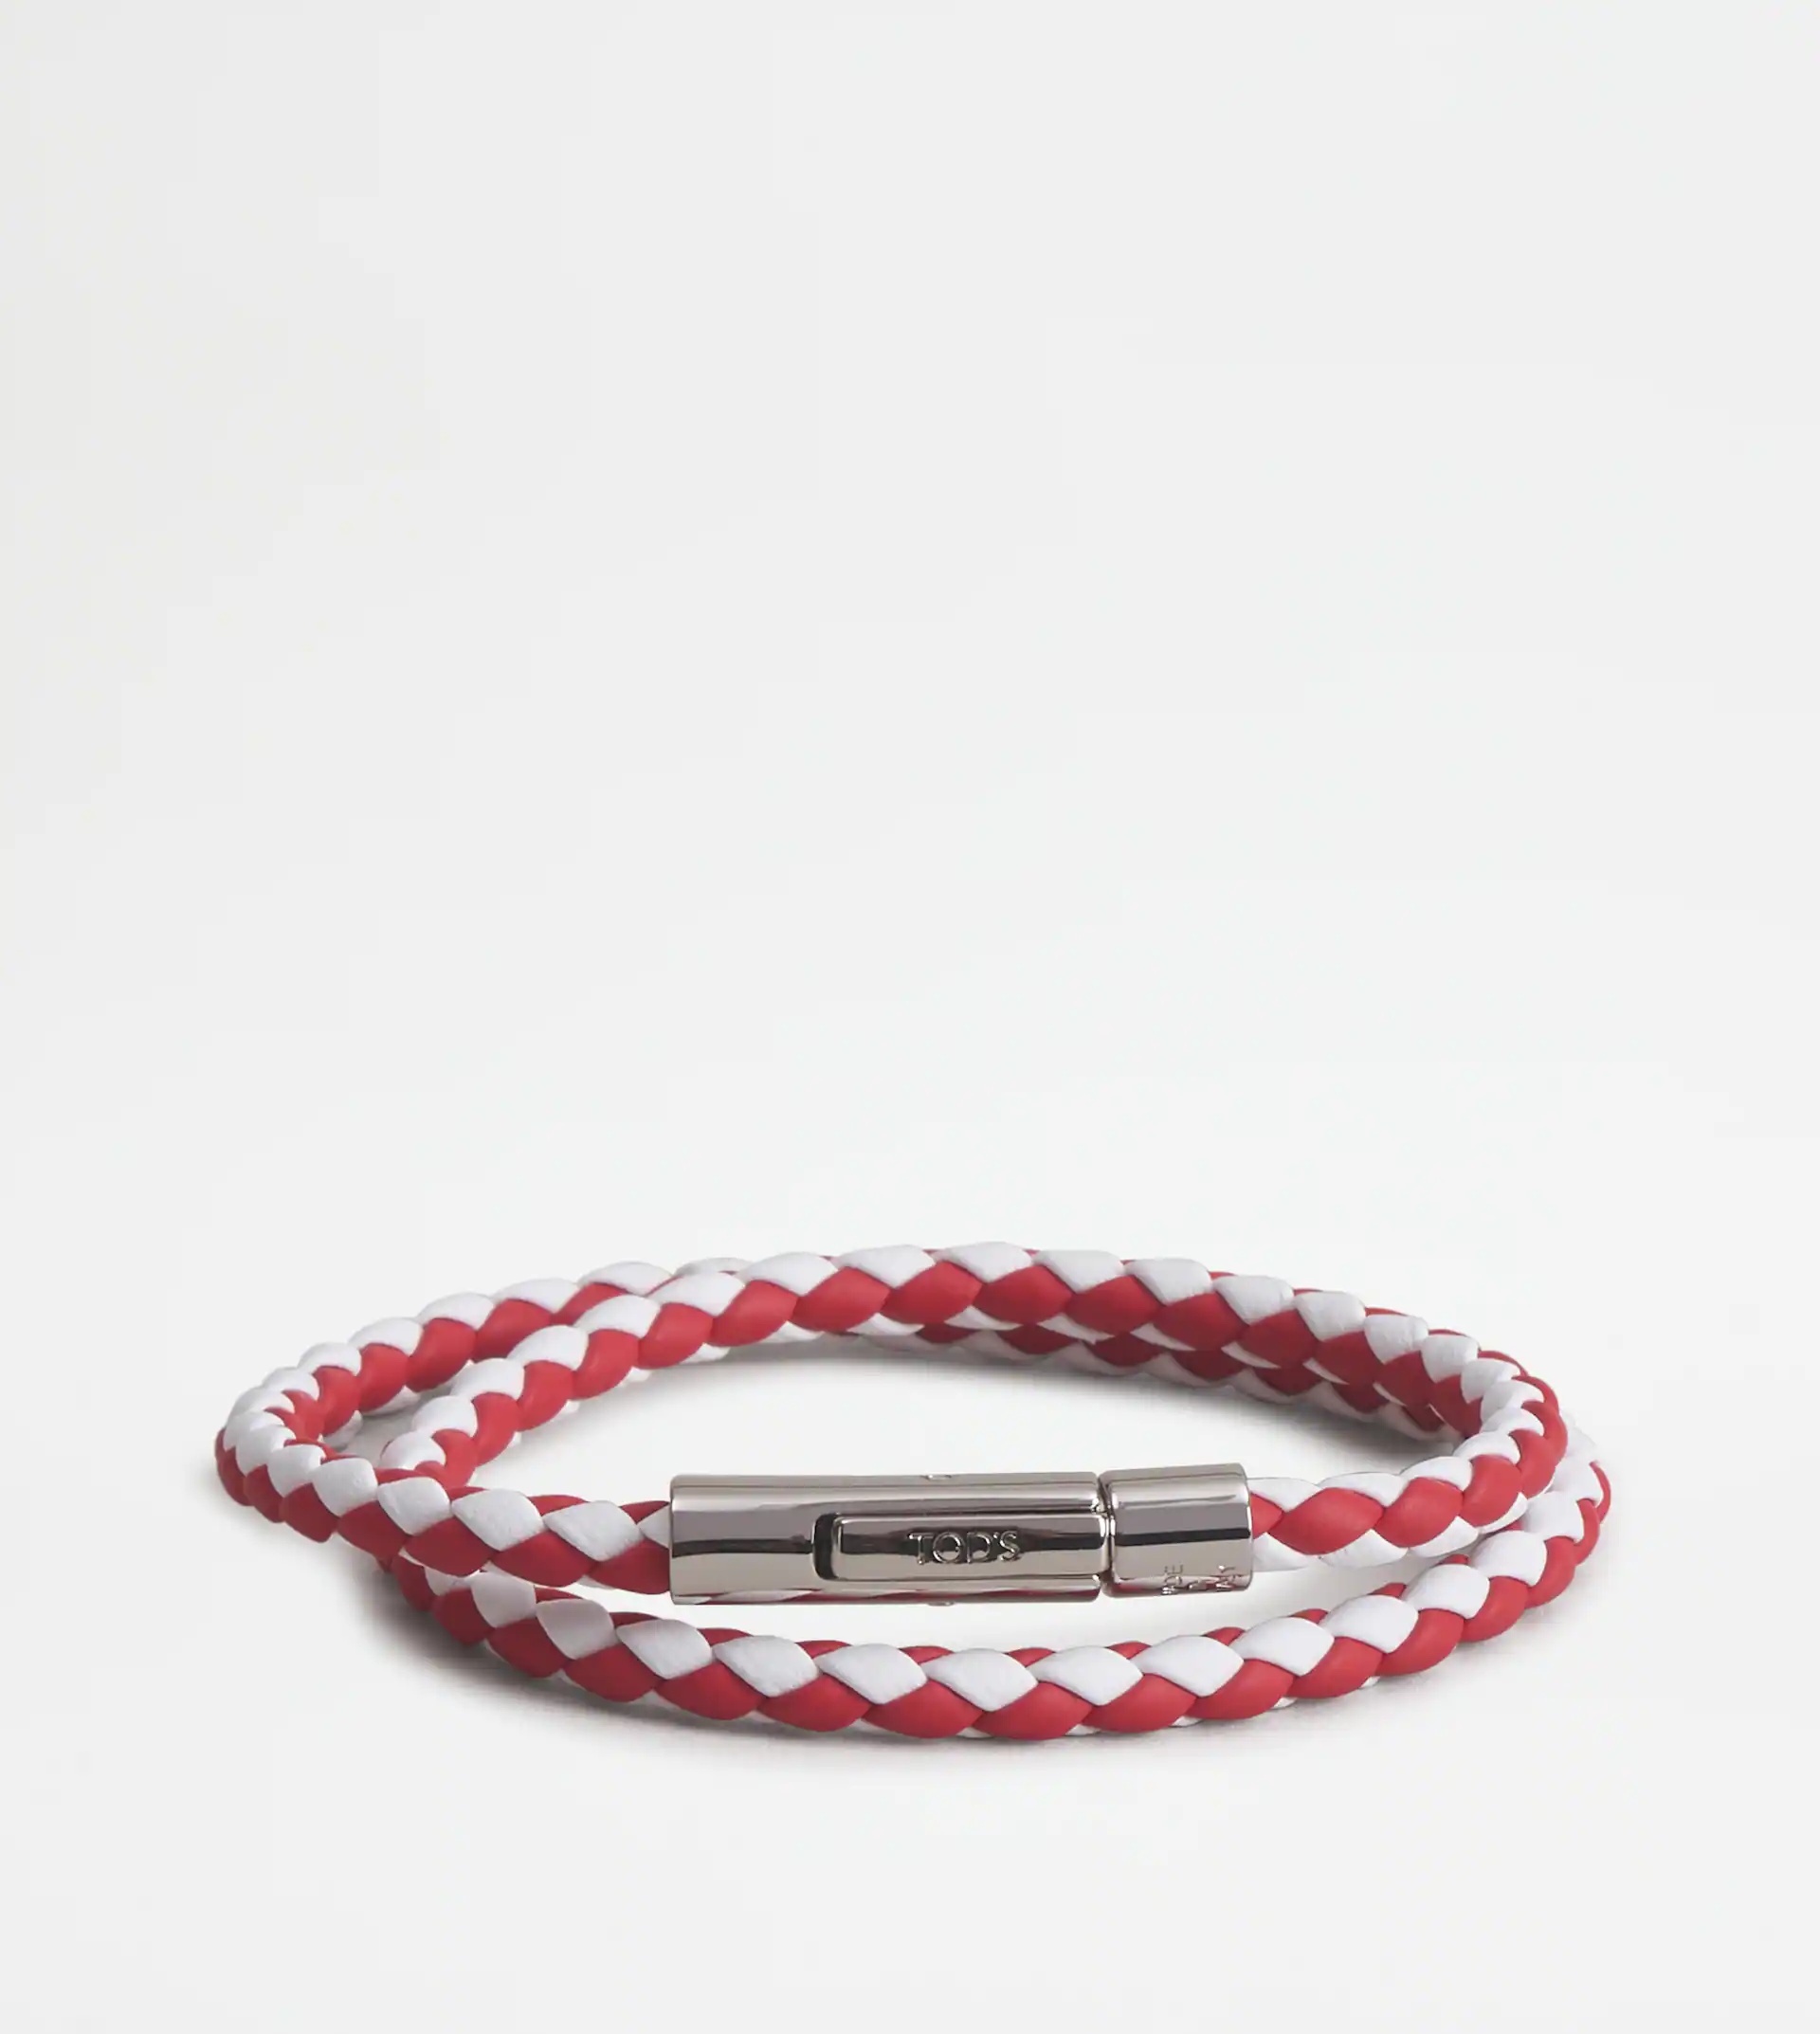 MYCOLORS BRACELET IN LEATHER - WHITE, RED - 1